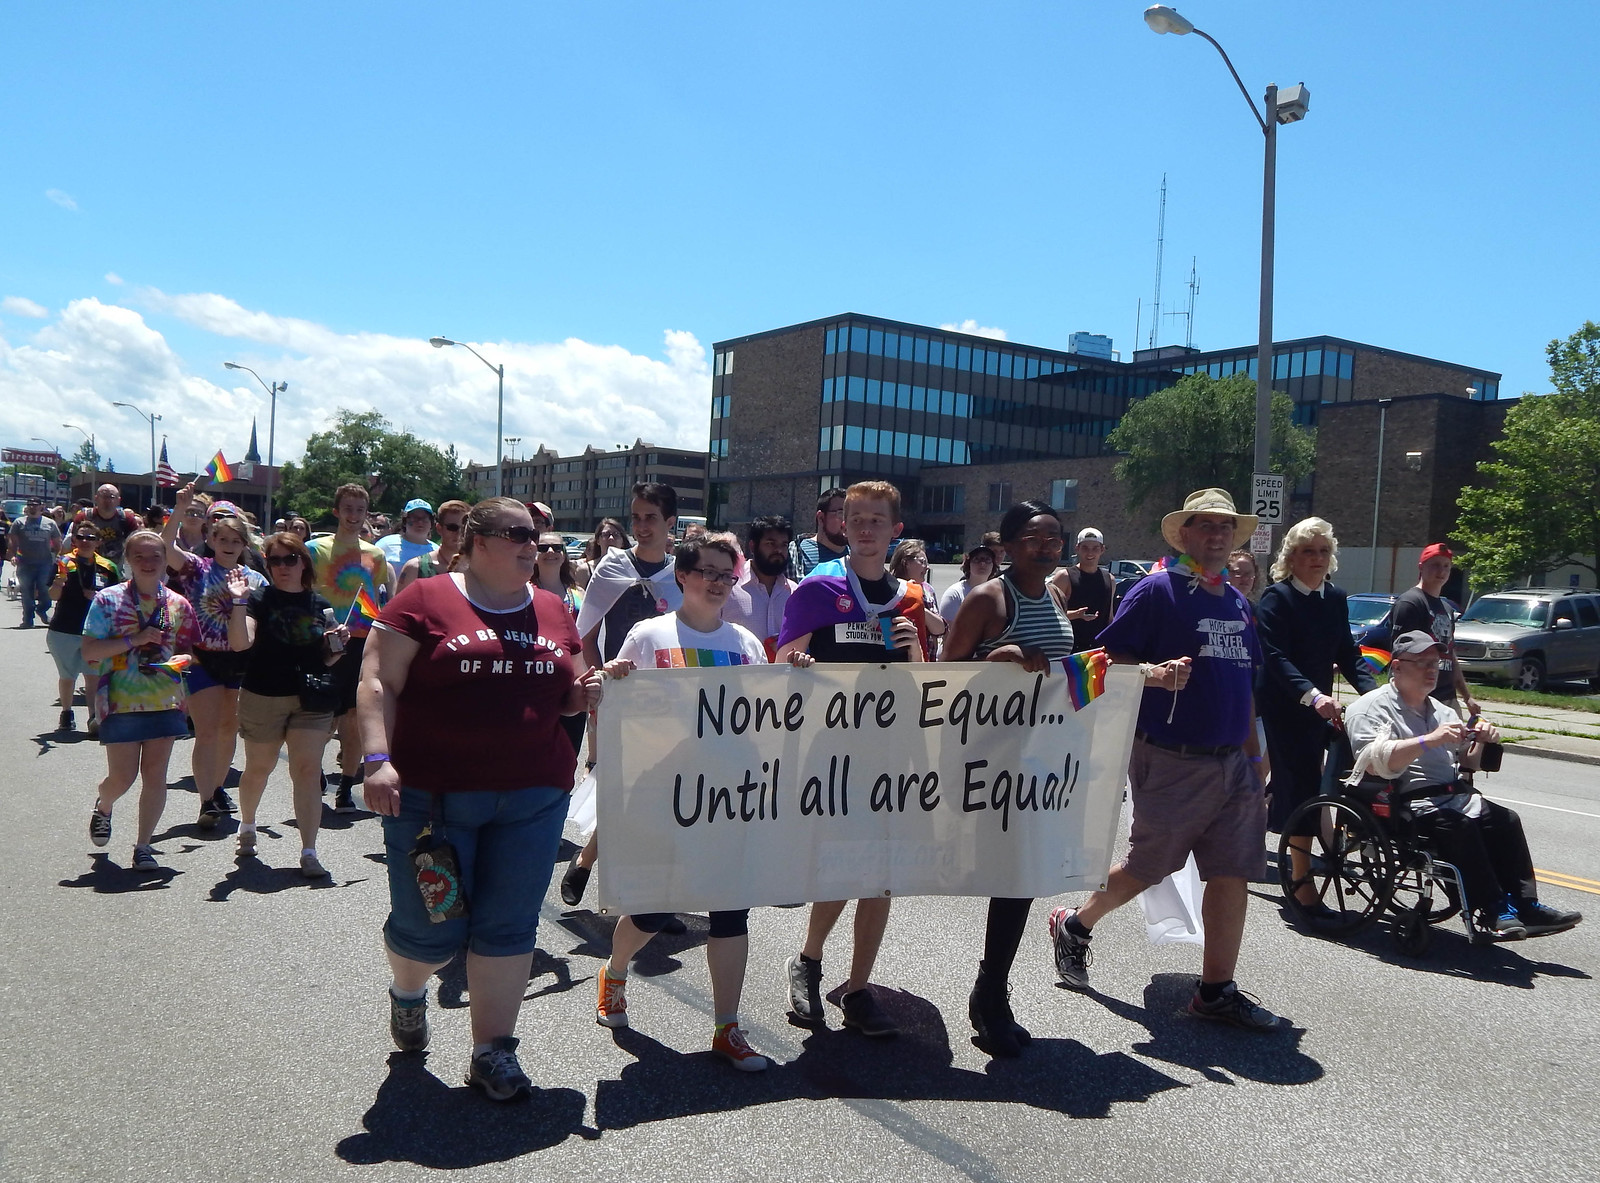 On June 24, 2017, Erie celebrated 25 years of Pride events with the 2017 Erie Pride March and Fest. It is estimated that about 750 people attended the festivities. Both local TV crews as well as the Erie Times News covered the event. MIC.com was back agai